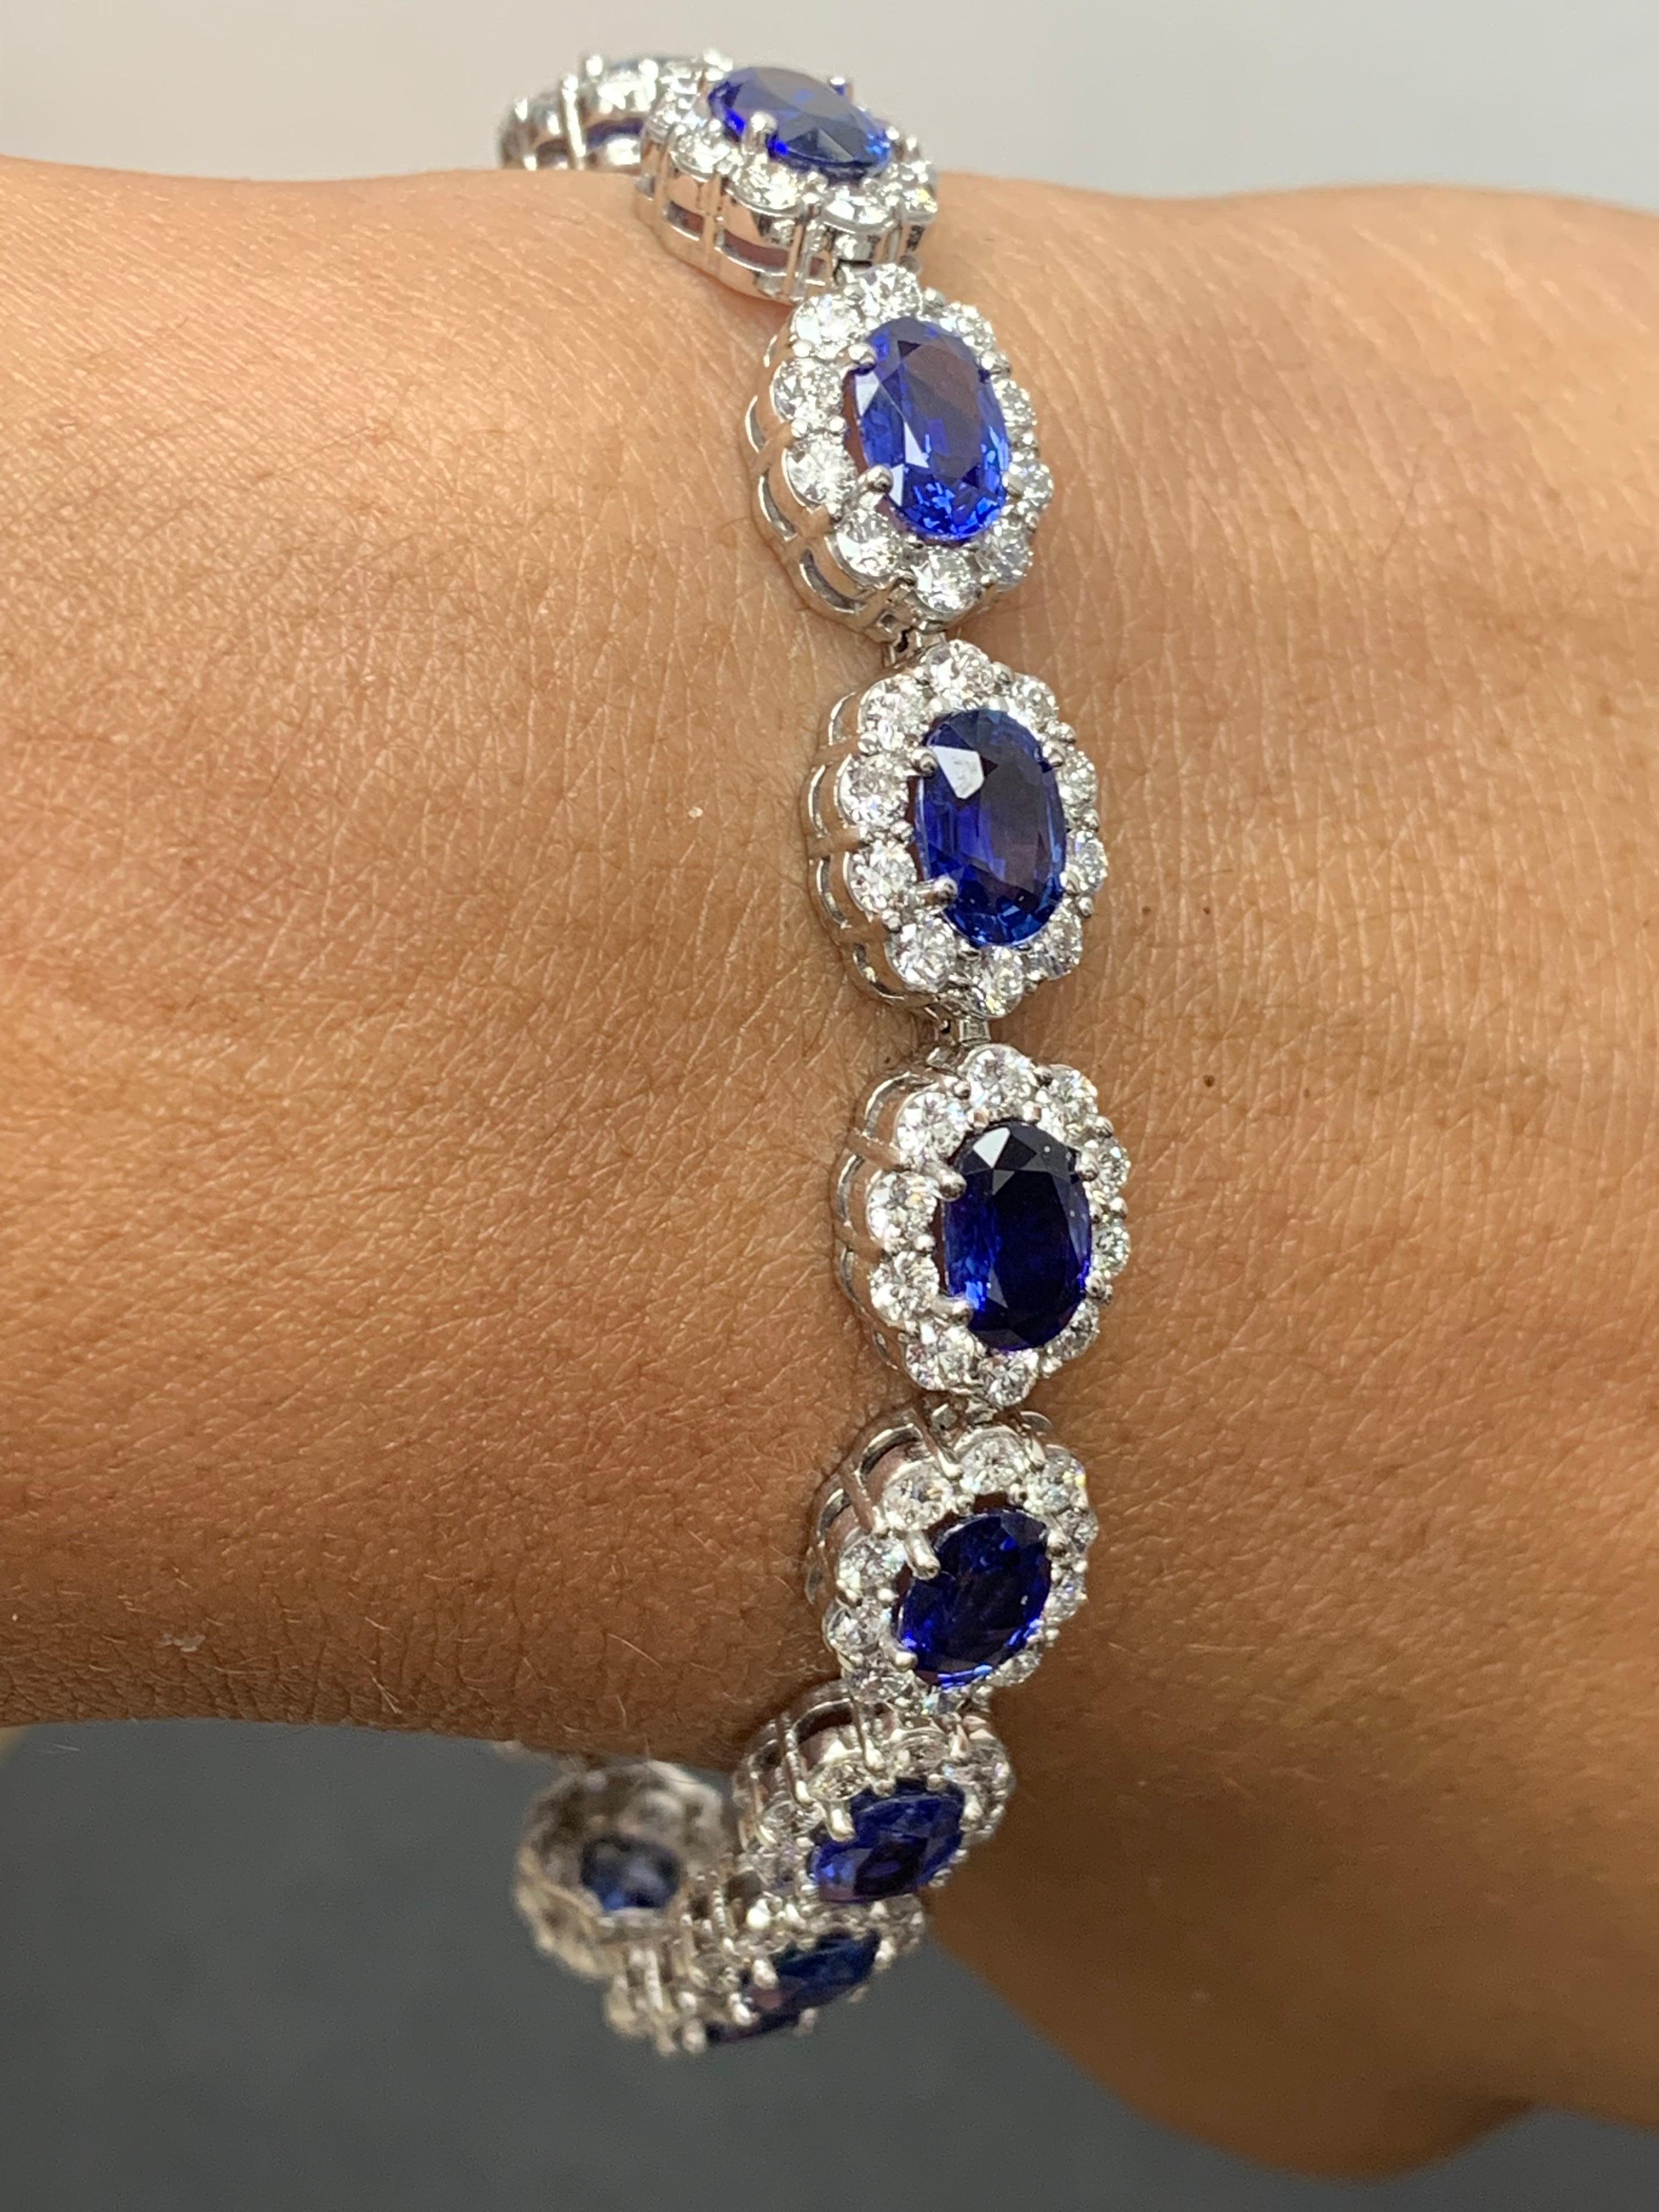 Women's 13.88 Carat Oval Cut Blue Sapphire and Diamond Halo Bracelet in 14K White Gold For Sale